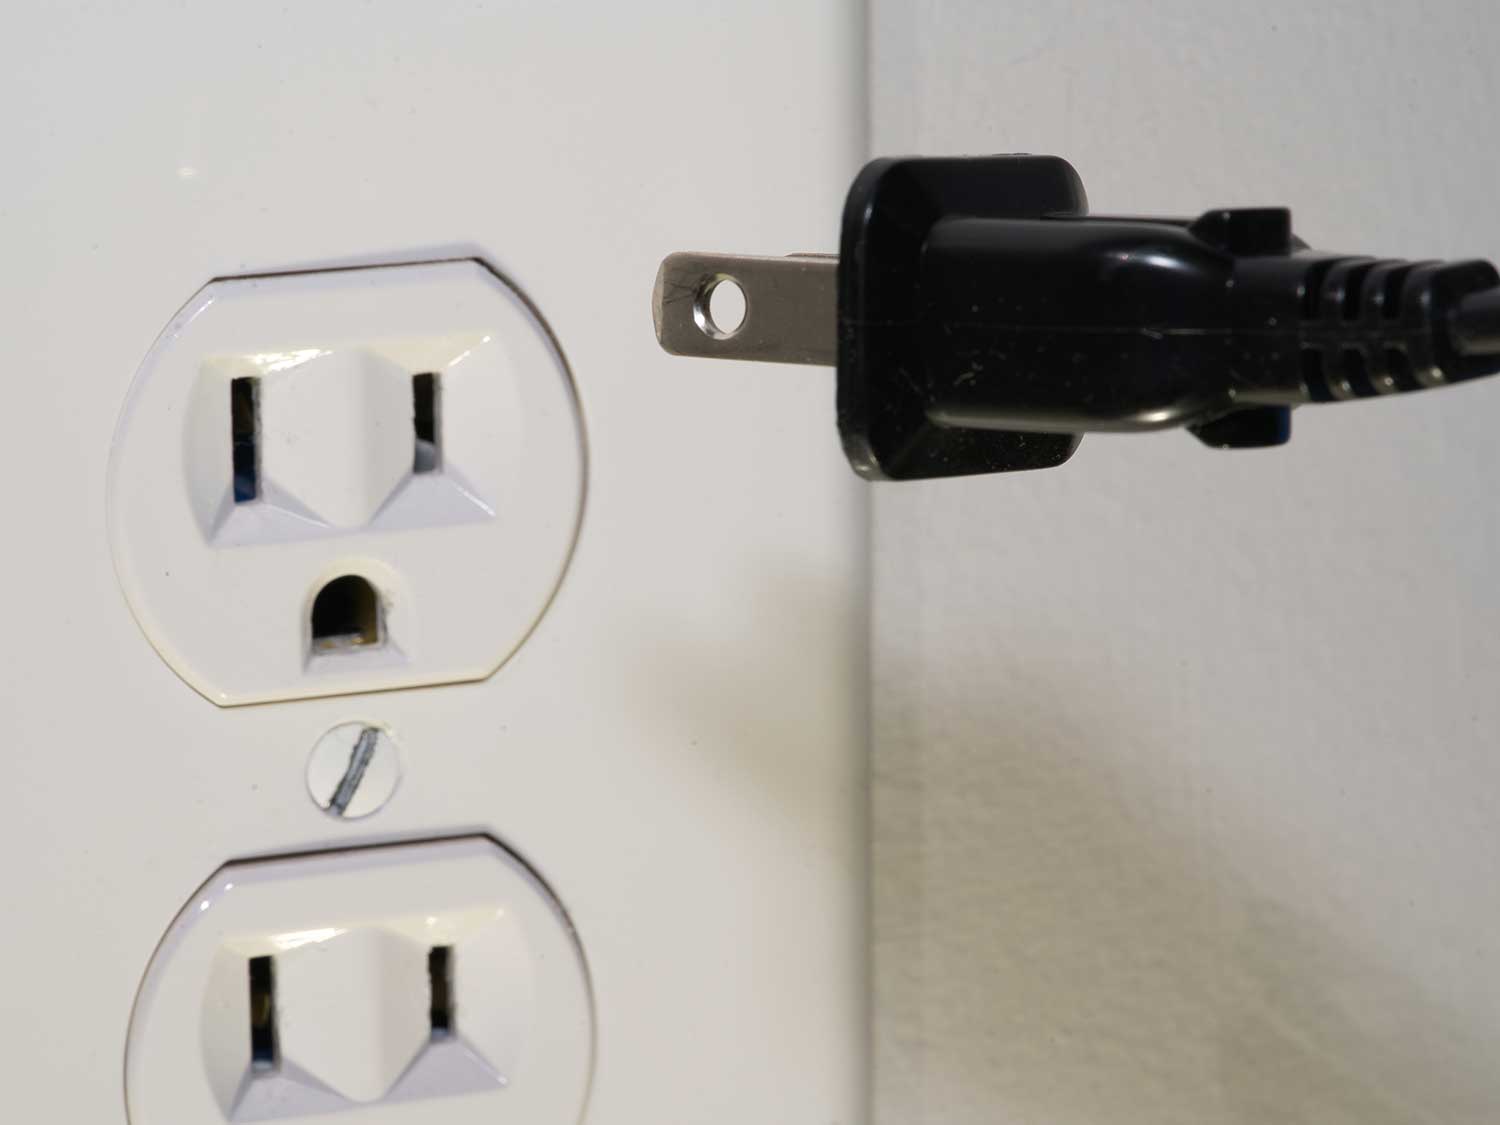 Plugging electrical cord into power outlet.